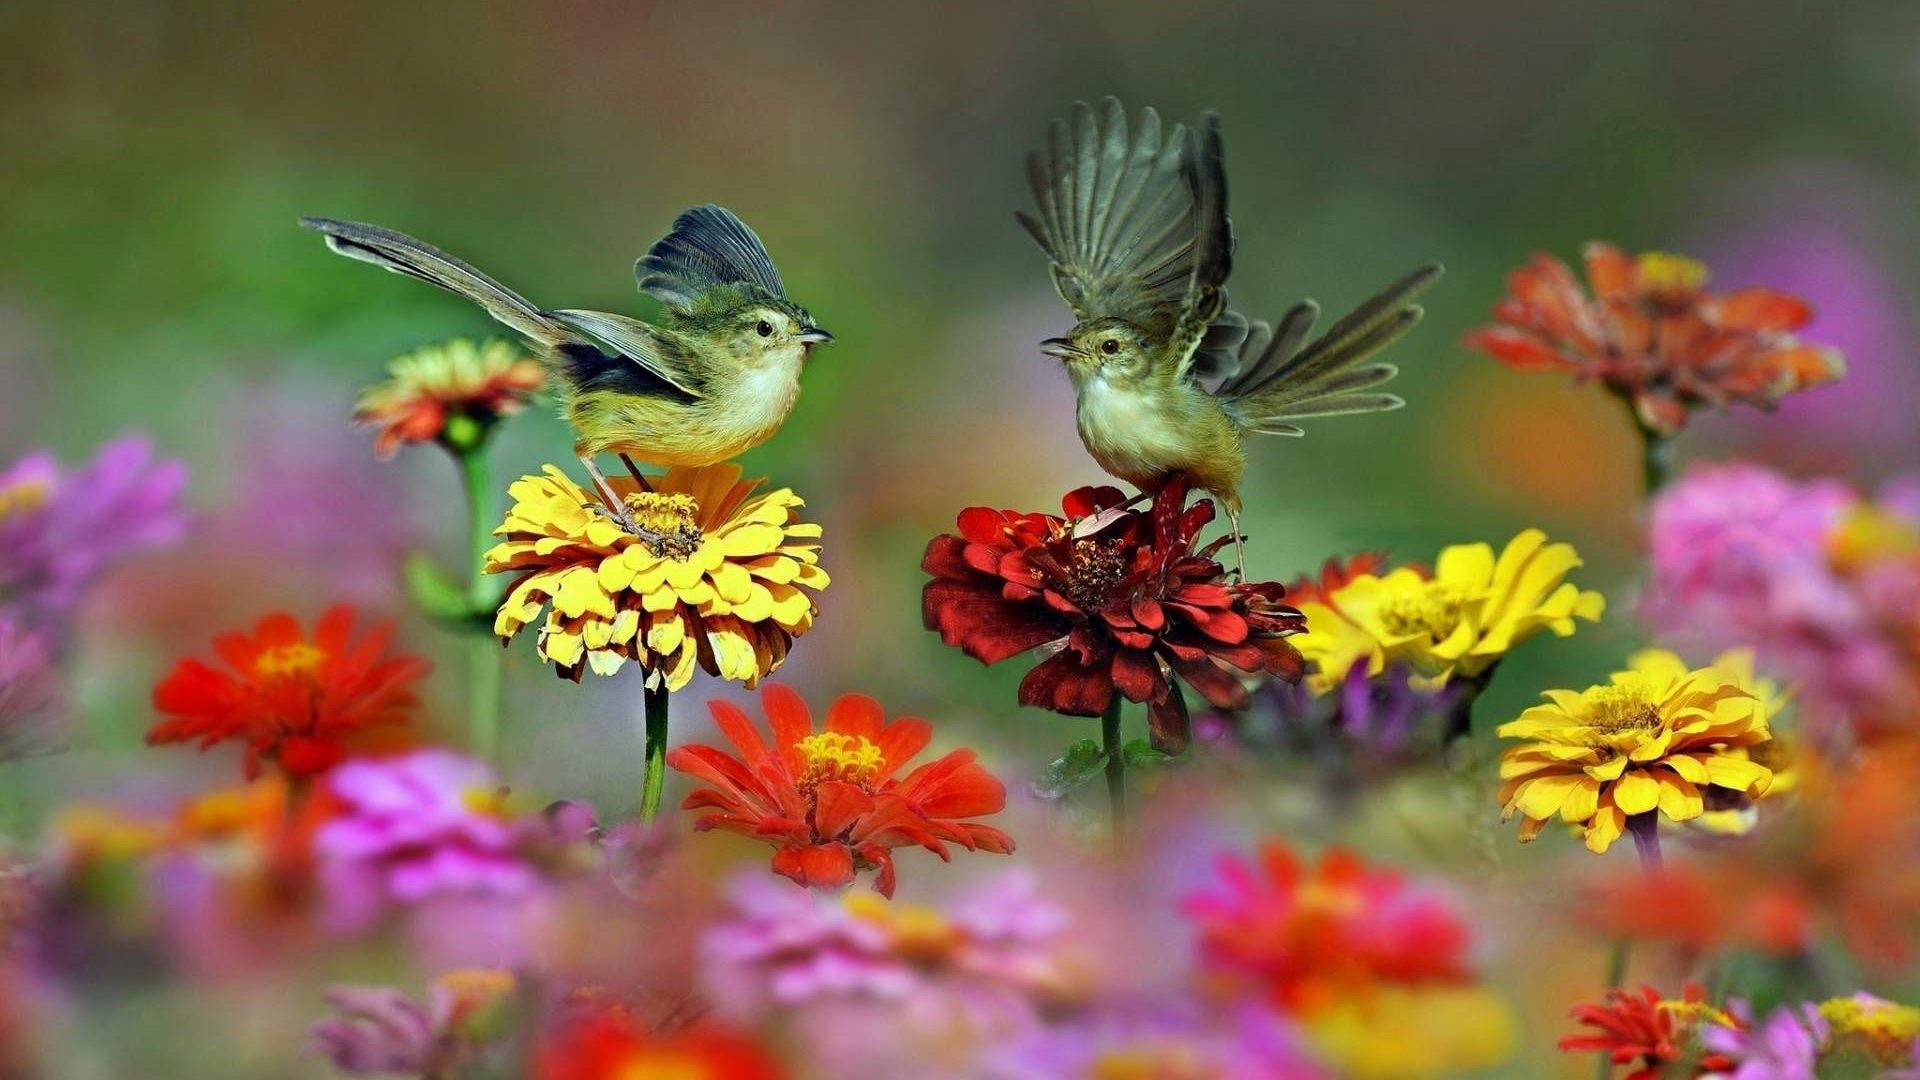 Vintage Flowers and Birds Wallpaper 1920x1080